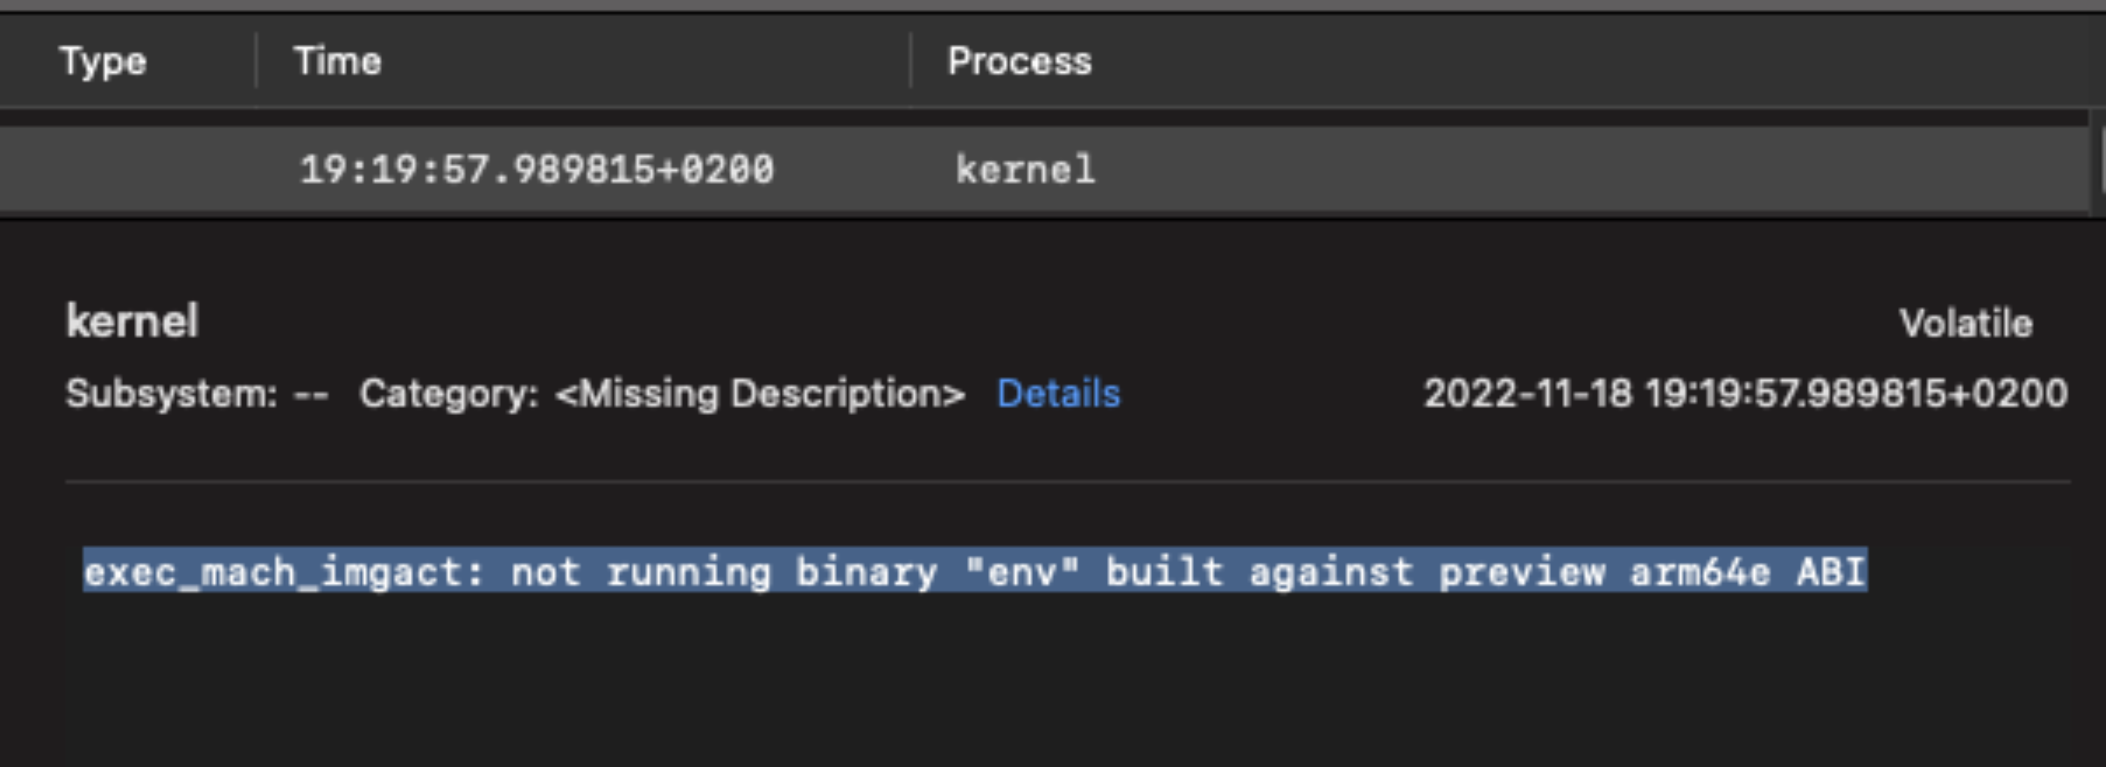 screenshot from console saying exec_mach_imgact: not running binary env built against preview arm64e ABI